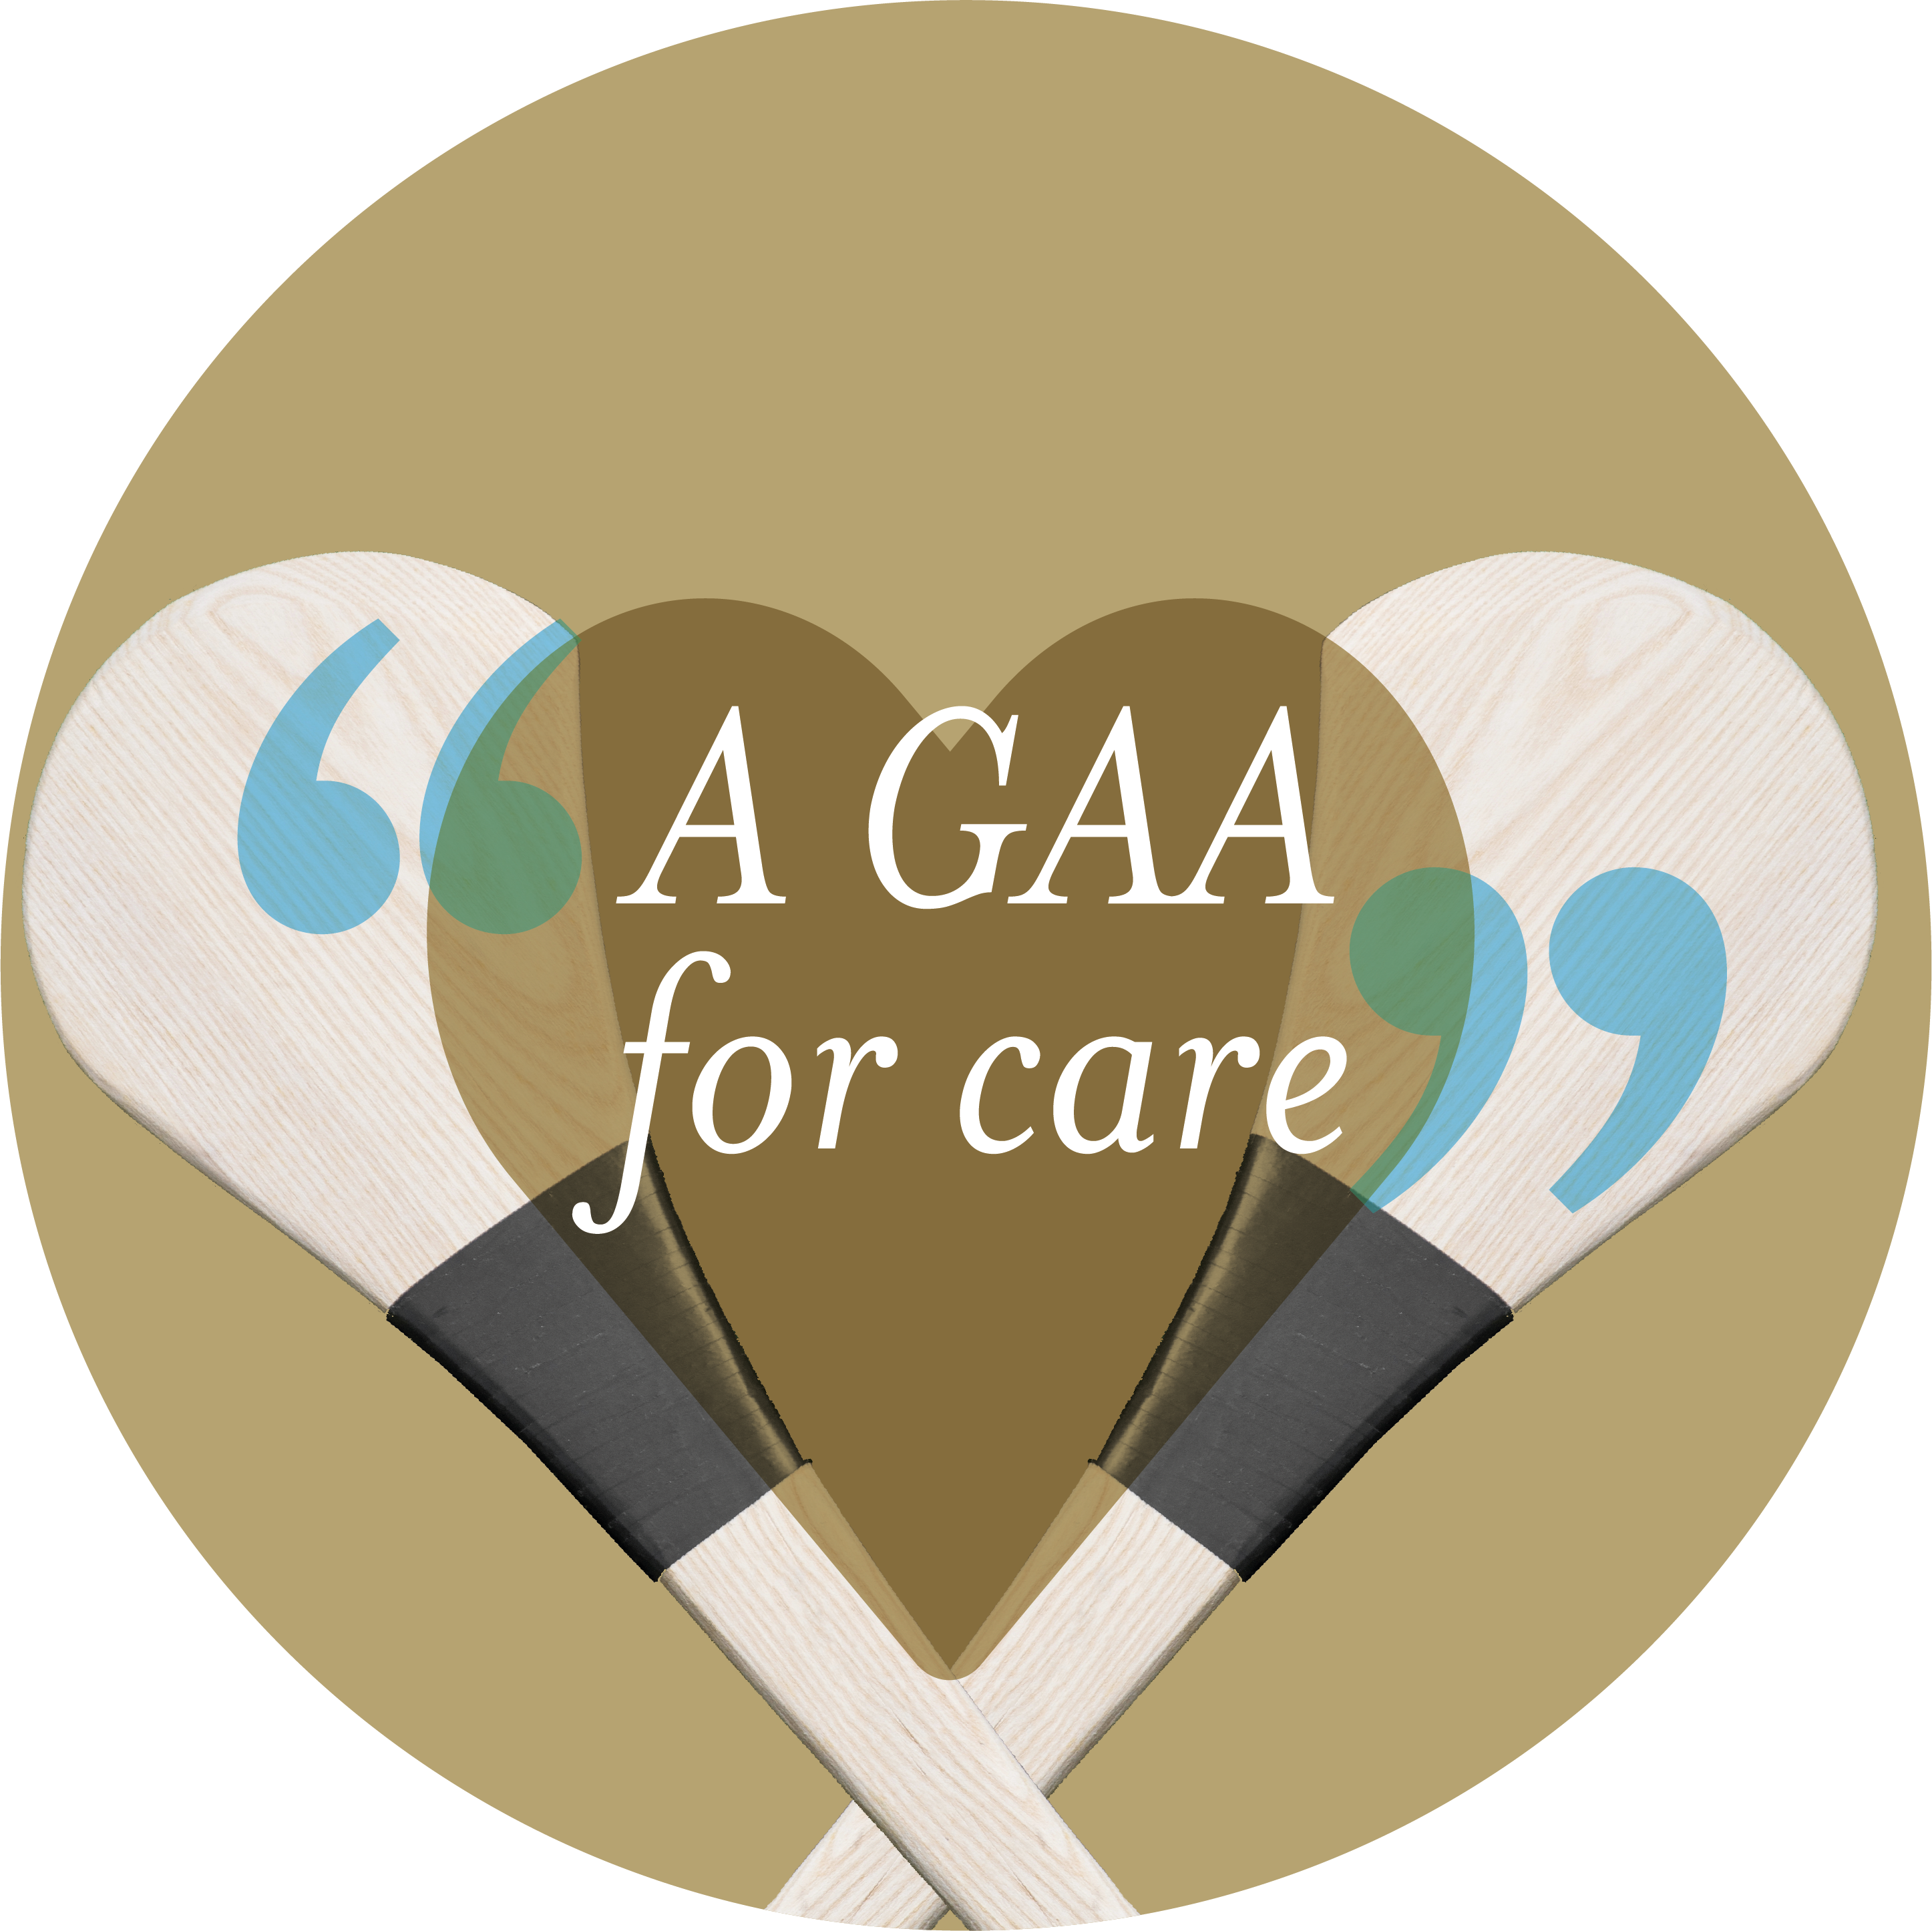 Image of a heart surrounded by two hurls; caption is: A GAA for care